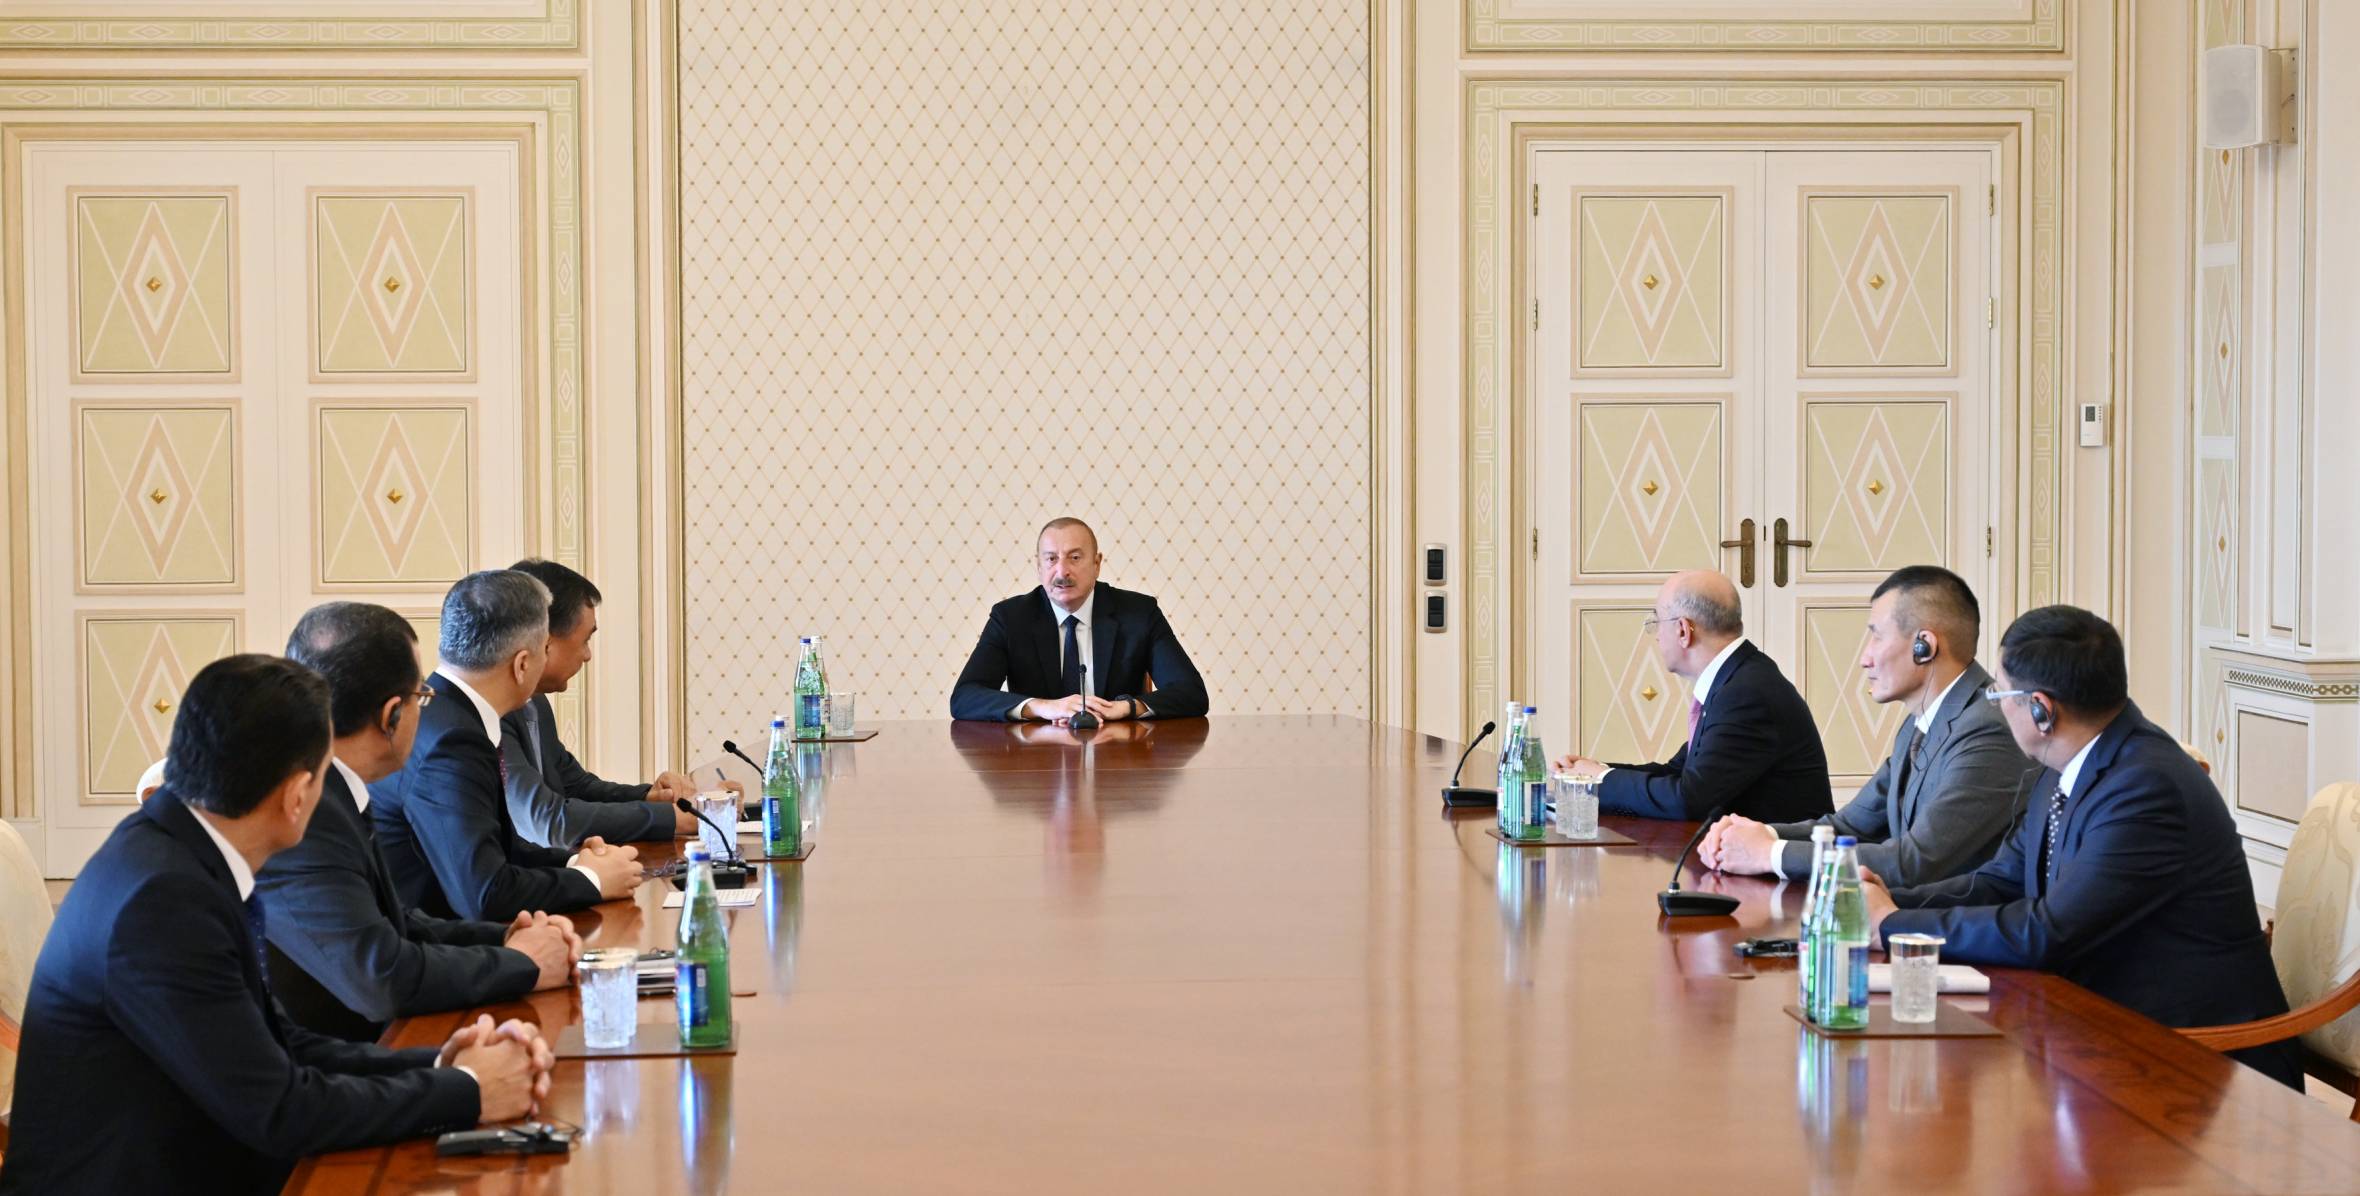 Ilham Aliyev received ministers of Turkic states participating in the events held in Baku